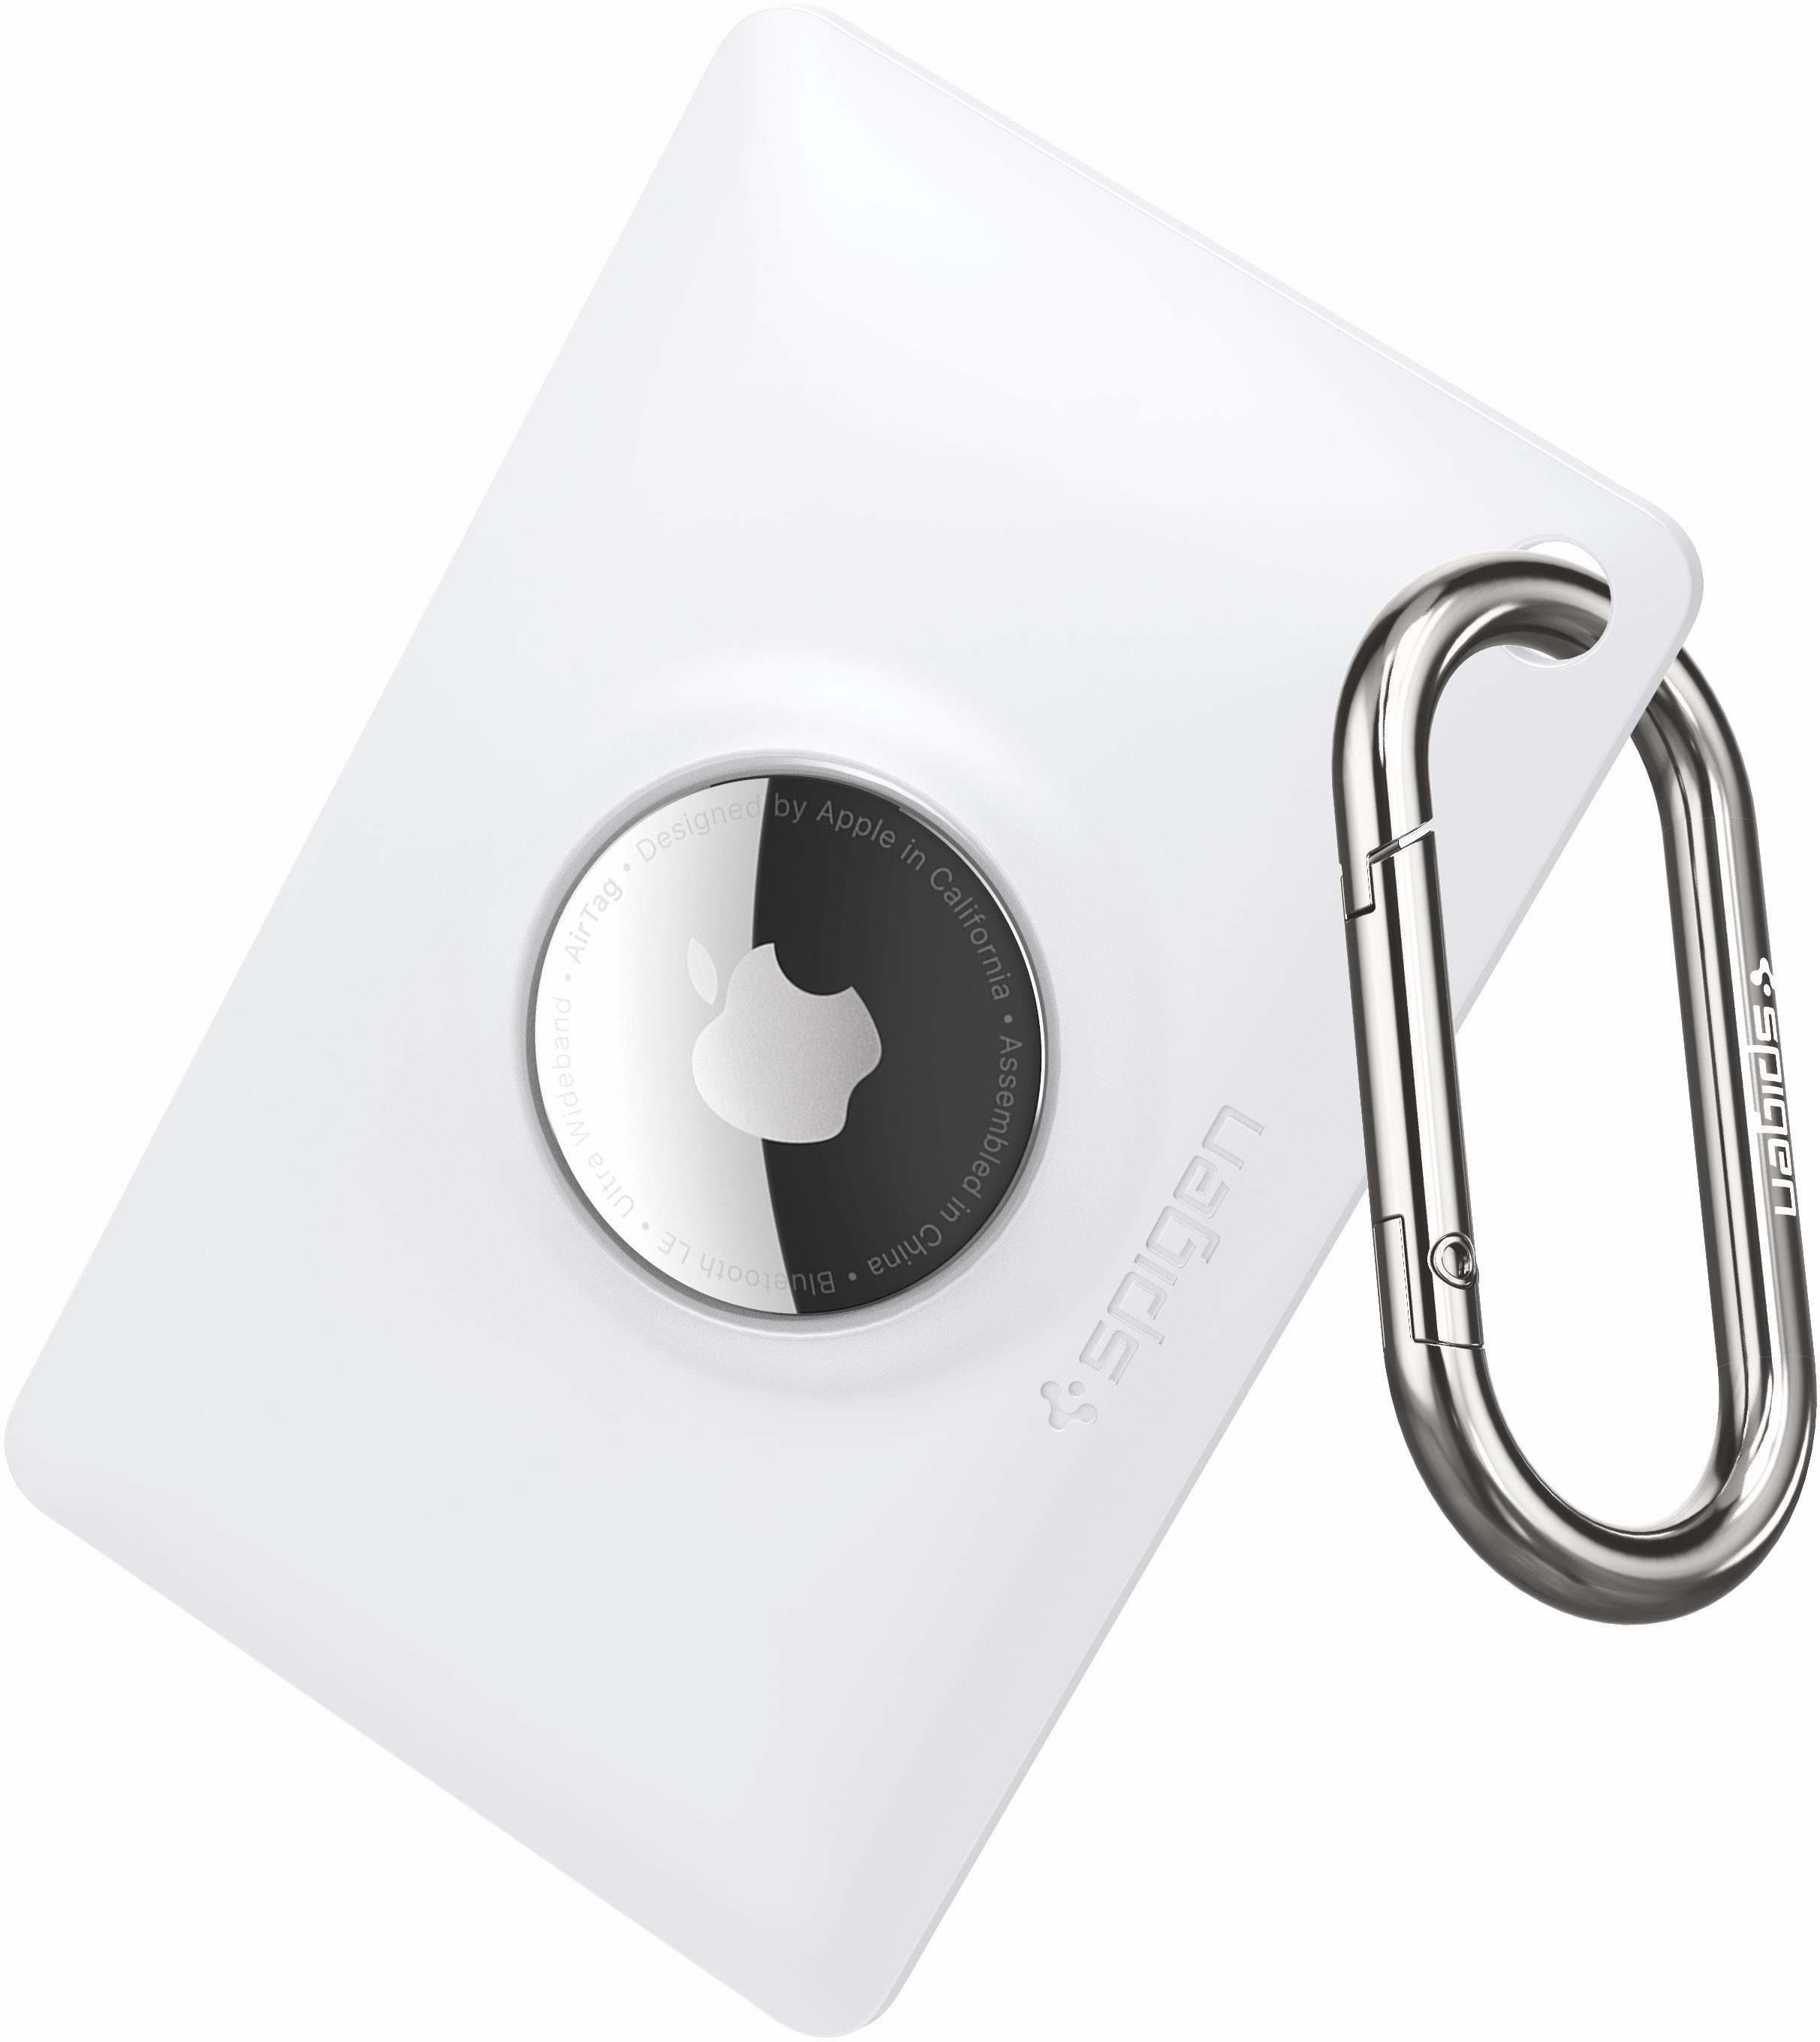 11 of the best Apple AirTag accessories: Cases, key rings, wallets and more